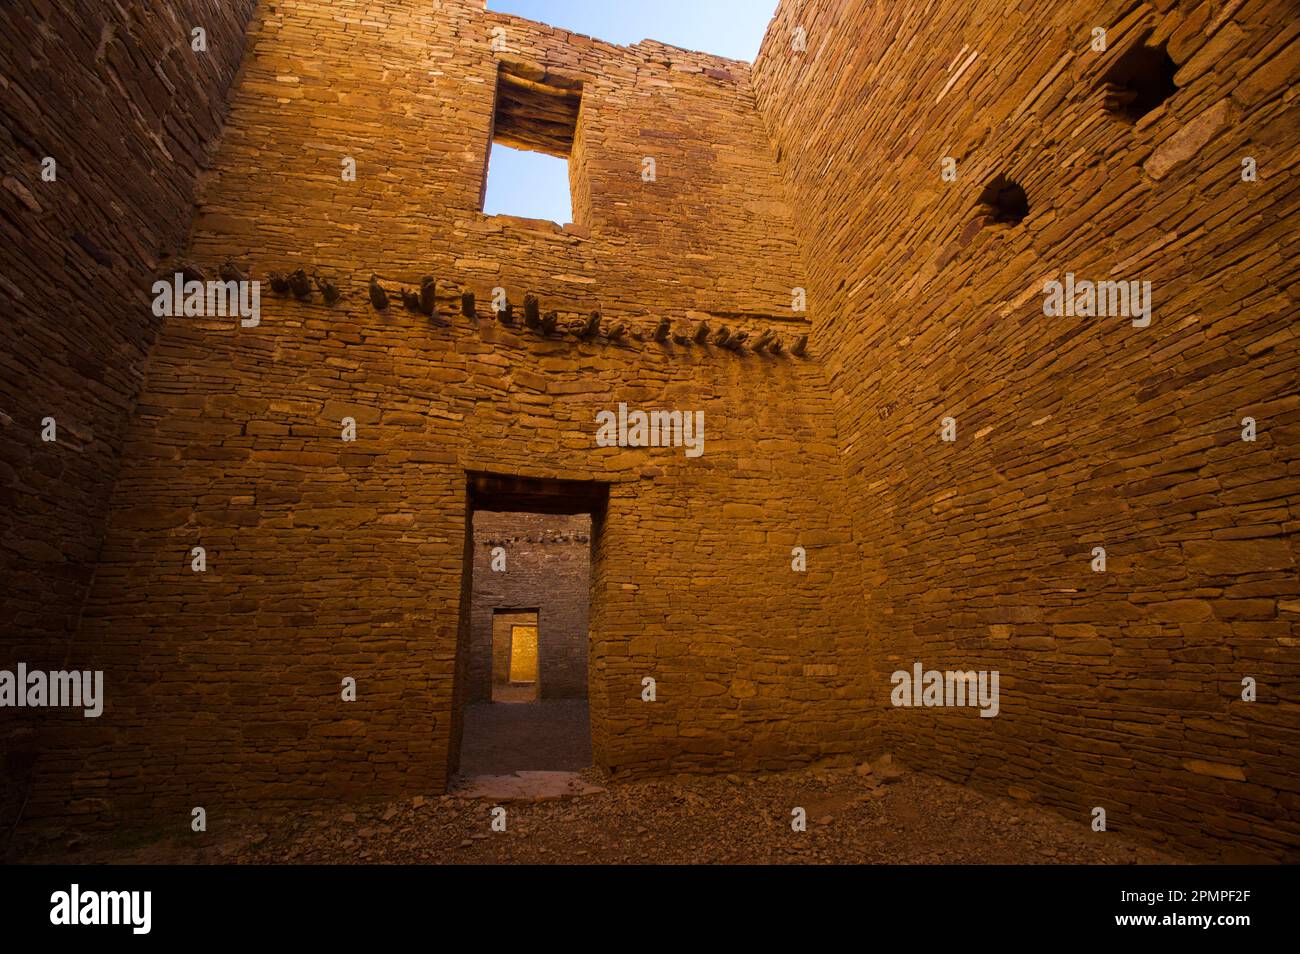 Interior of a restored building at Pueblo Bonito in Chaco Culture National Historical Park, New Mexico, USA; New Mexico, United States of America Stock Photo